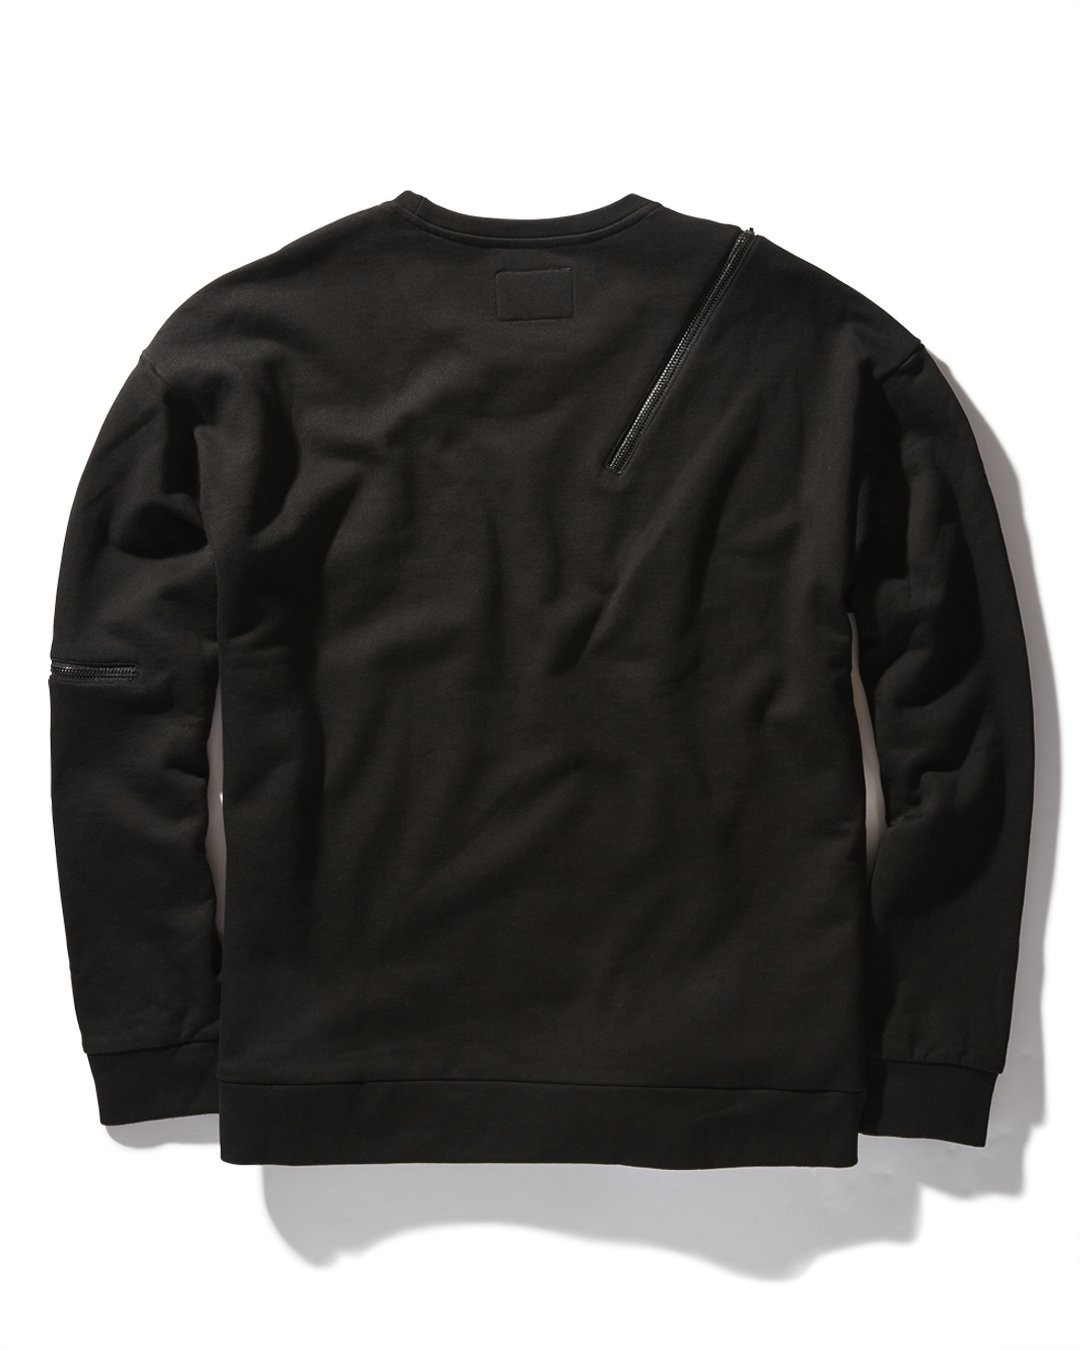 ARTIST FOR LIFE CREWNECK ZIP - HIGH QUALITY AND INEXPENSIVE - ARTIST FOR LIFE CREWNECK ZIP HIGH QUALITY AND INEXPENSIVE-01-1